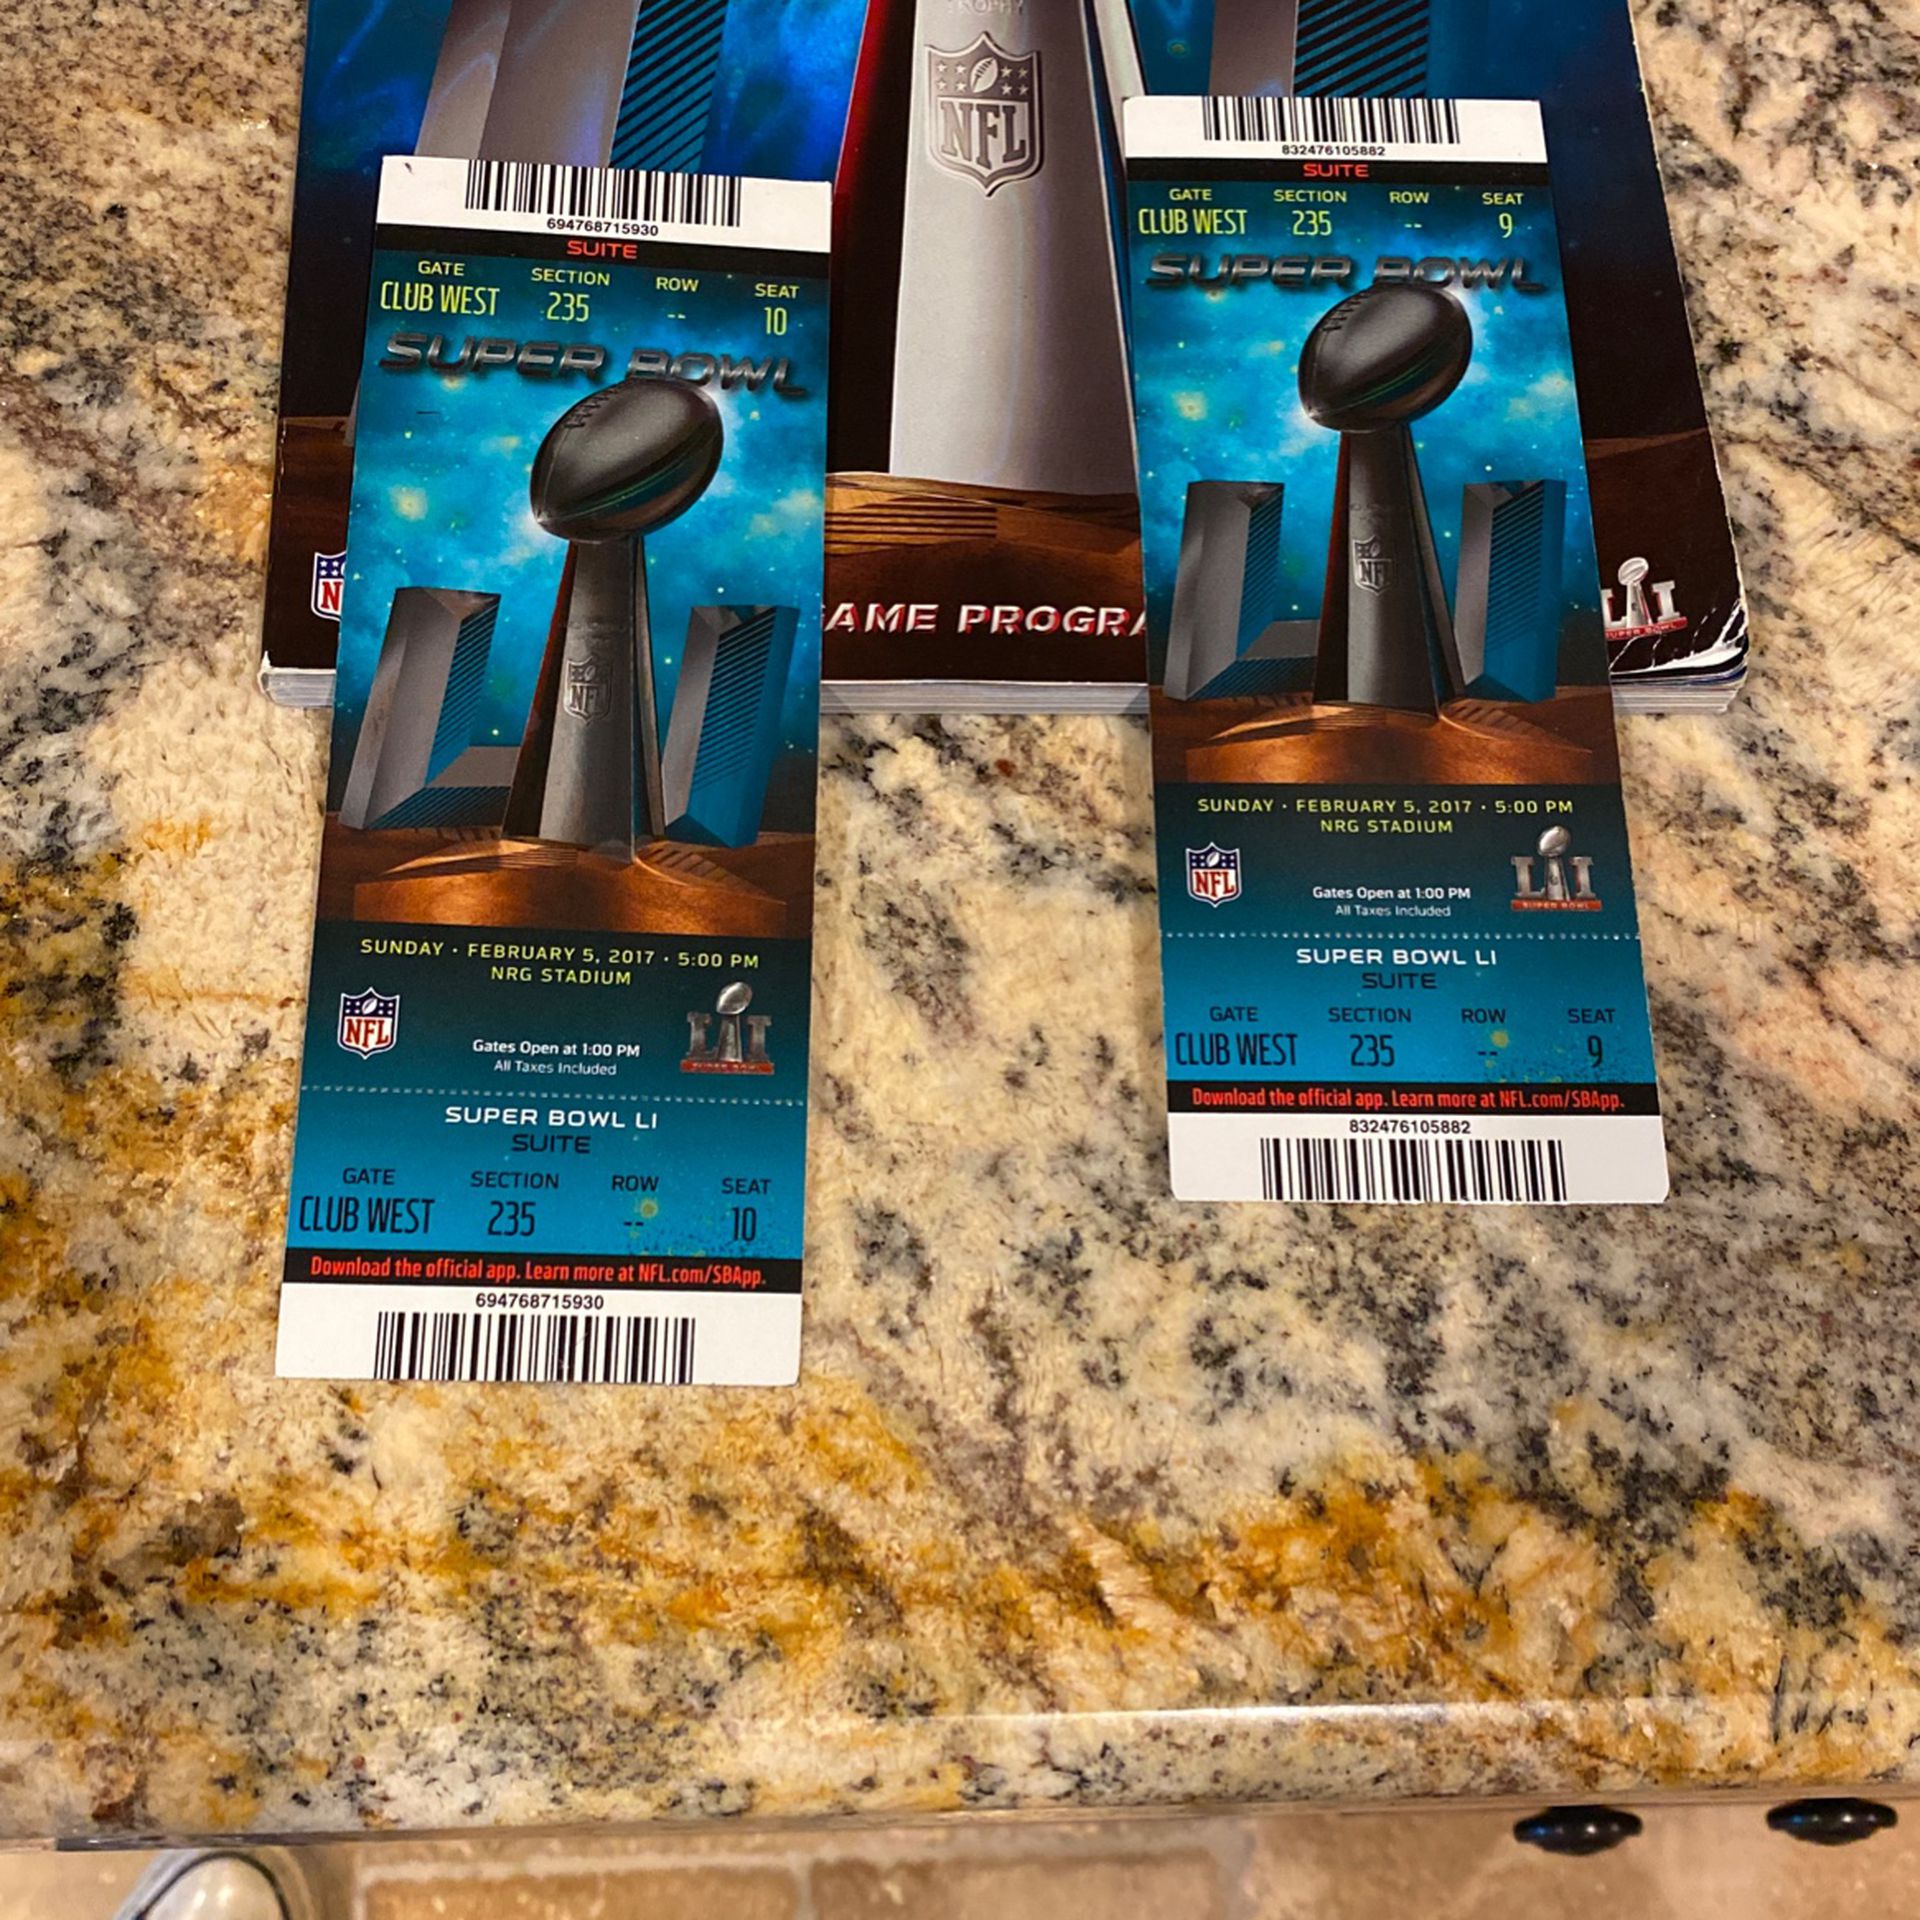 Super Bowl 51 Program And 2 Suite Tickets